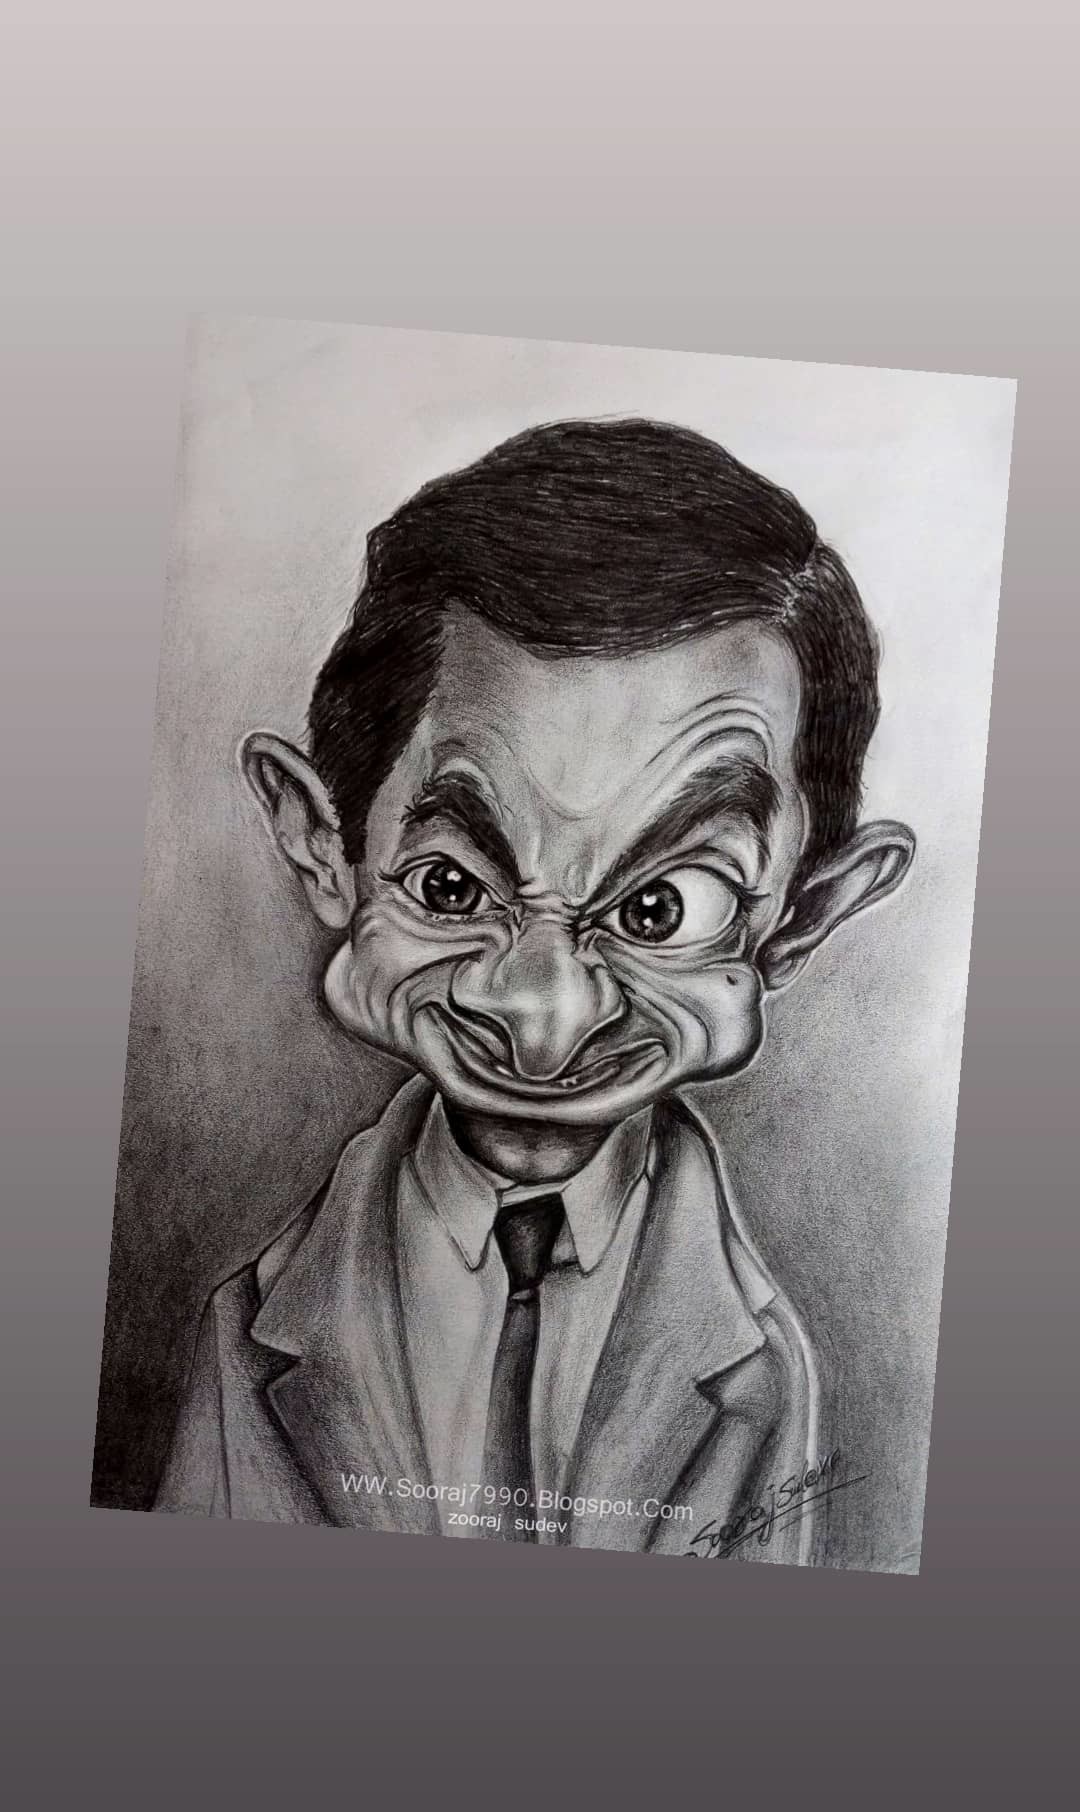 How to Sketch a Mr Bean - YouTube